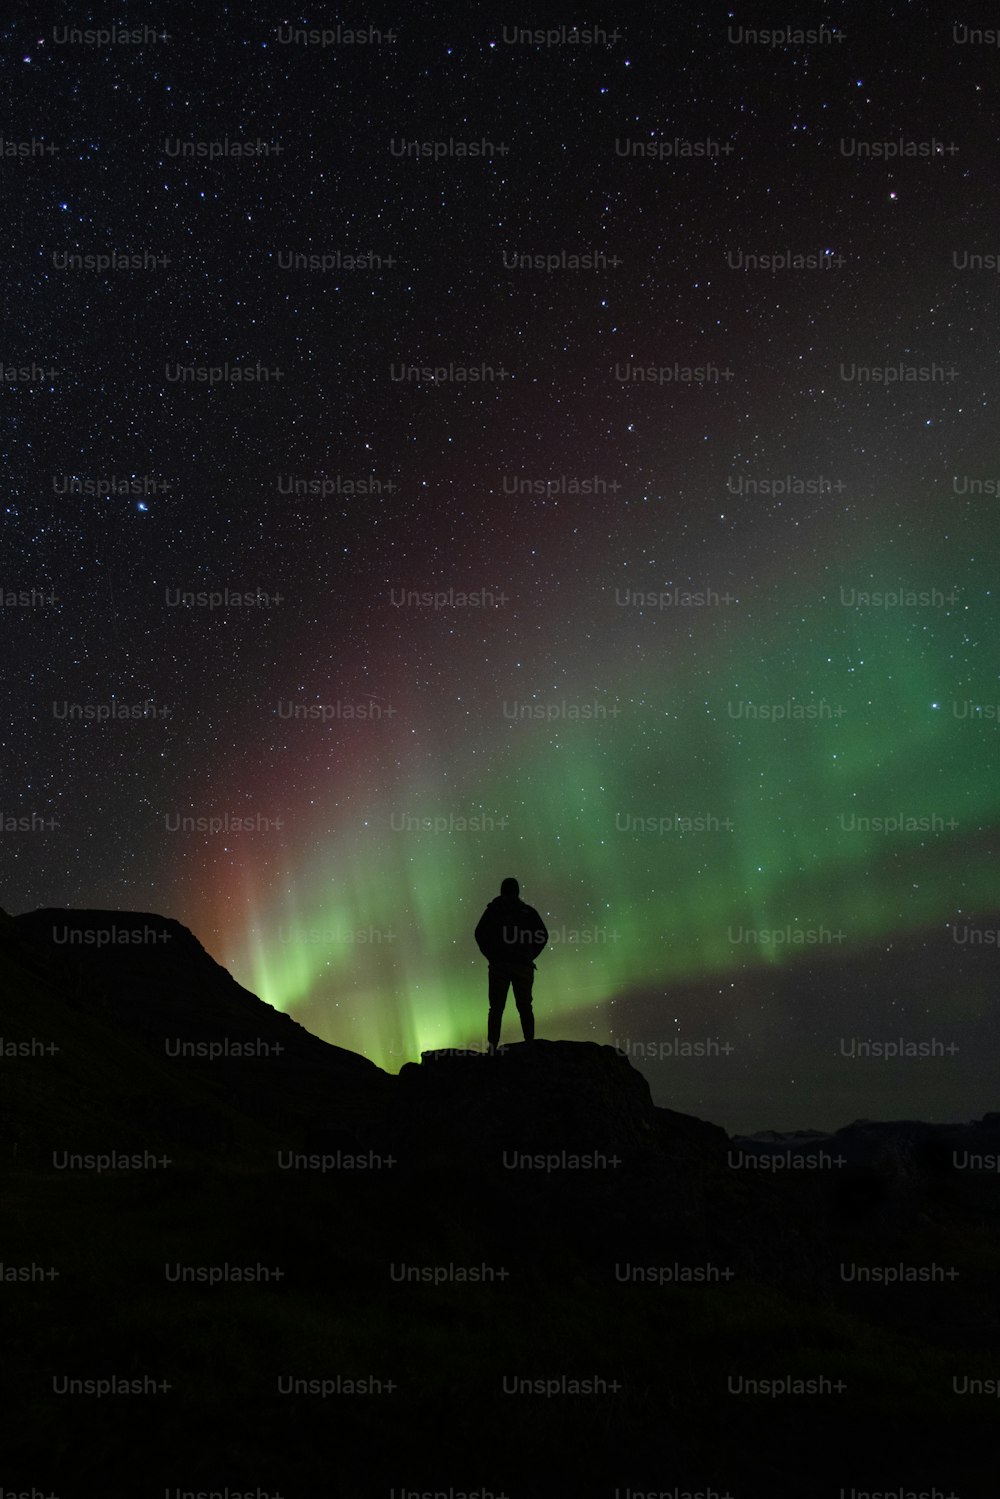 A man standing on top of a car under a night sky photo – Free